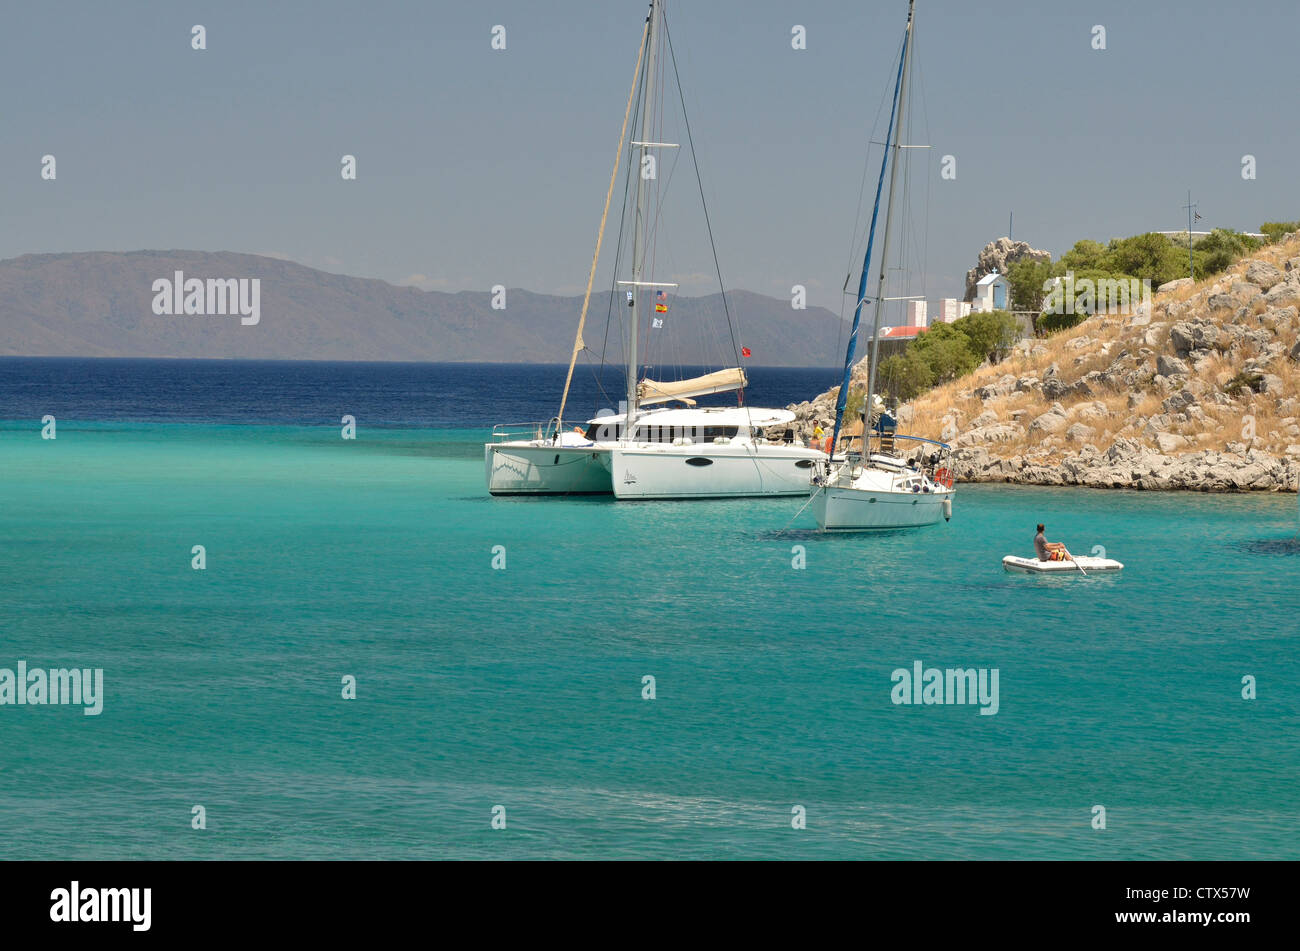 A catamaran, a sailboat and a raft crowd the amazing bay at Aghia Marina with the turkish peninsula of Datca in the background. Stock Photo